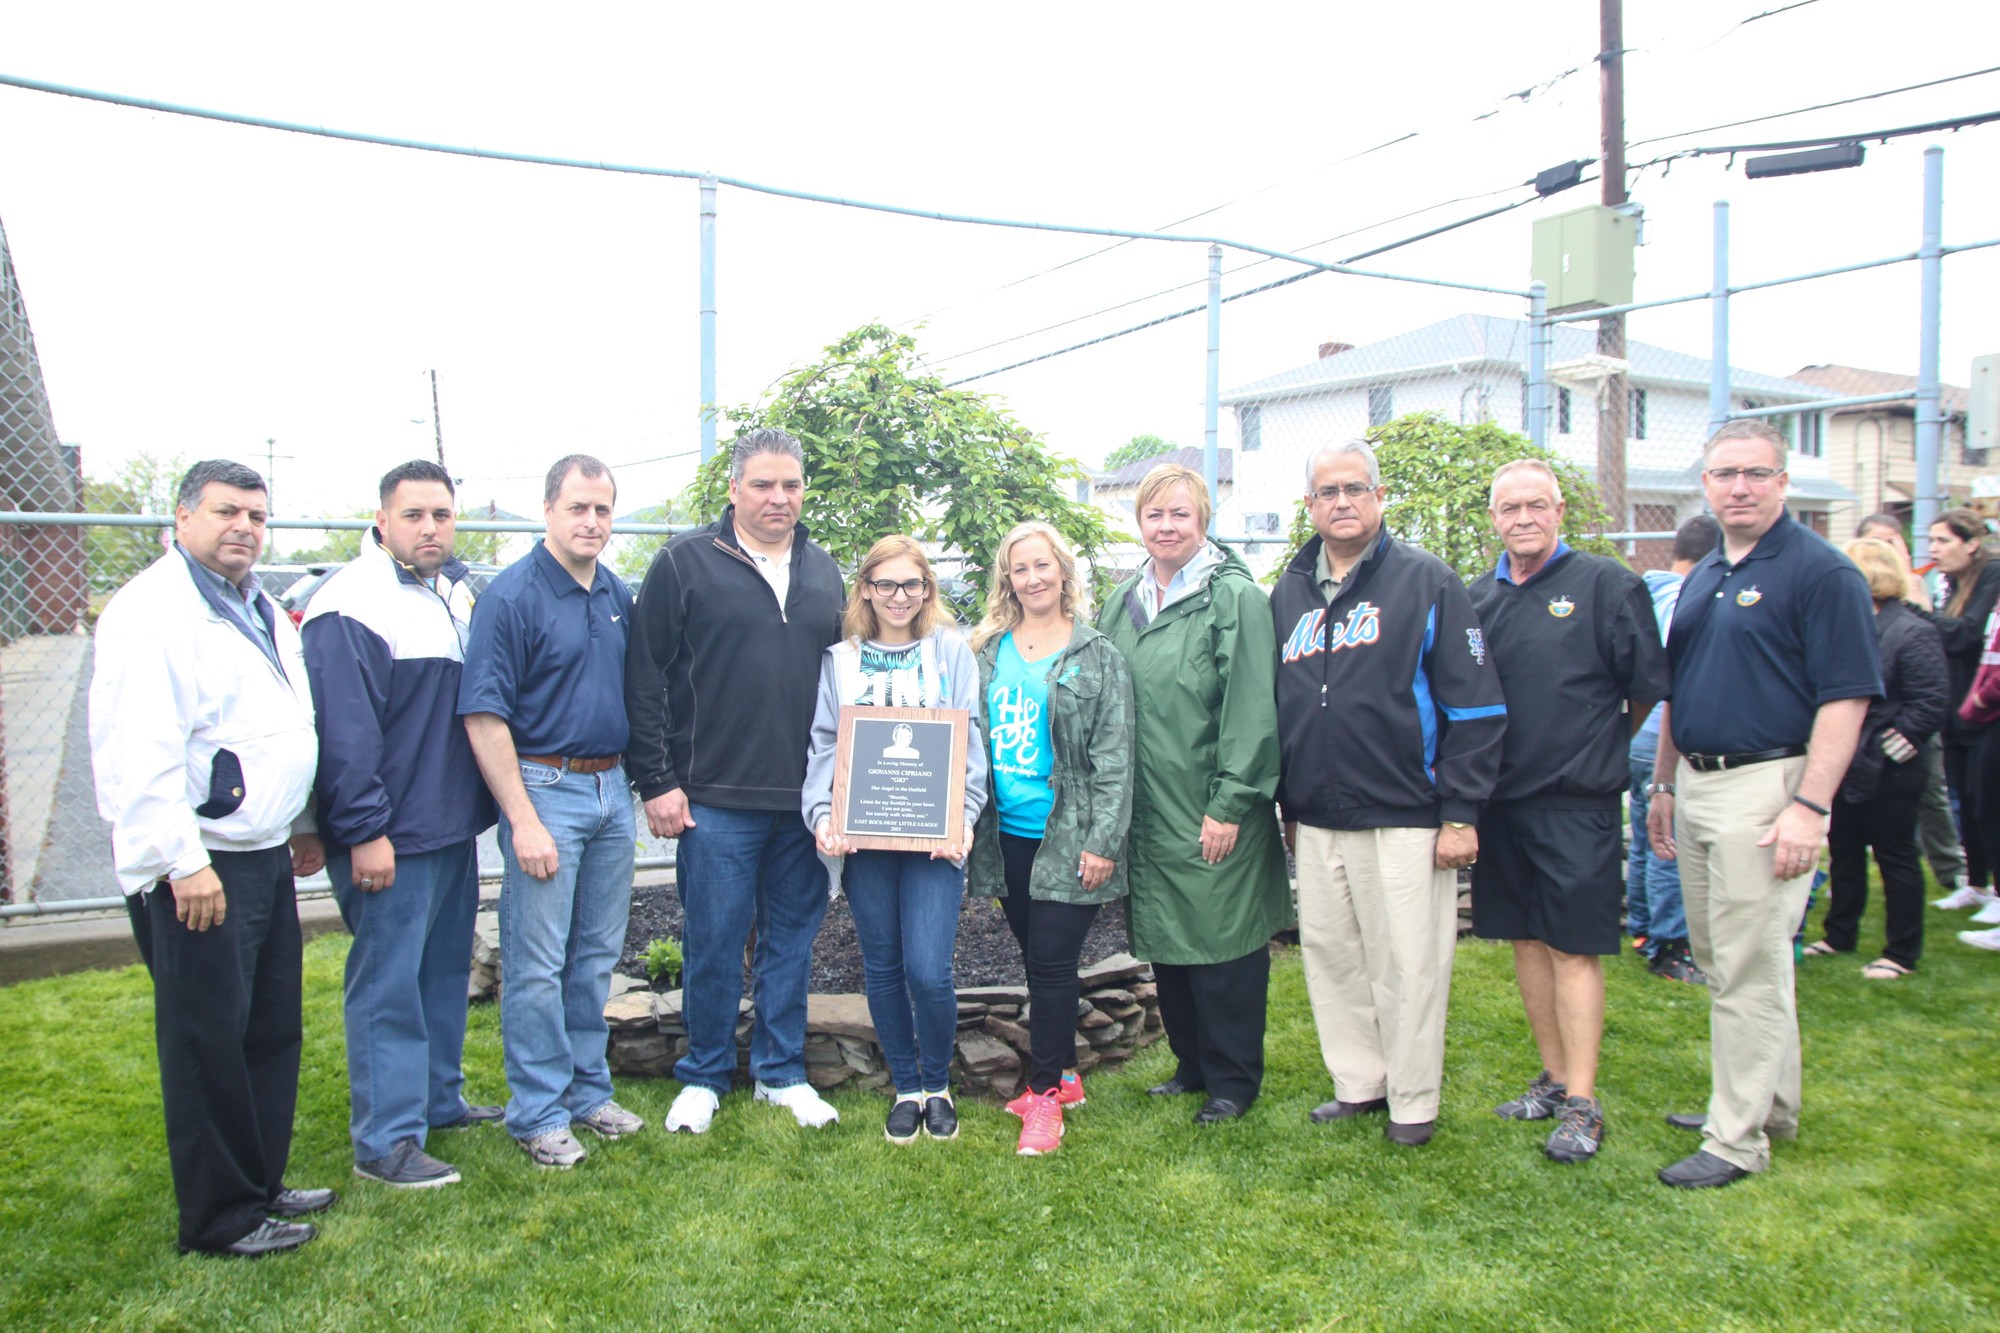 From left: East Rockaway Mayor Bruno Romano; Island Park Fire Chief Anthony D'Esposito, Assemblyman Brian Curran; John, Gianna, and Georgina Cipriano, Supervisor Kate Murray, Councilman Anthony Santino; and East Rockaway Trustees Steve Fried and Rich Bilello.